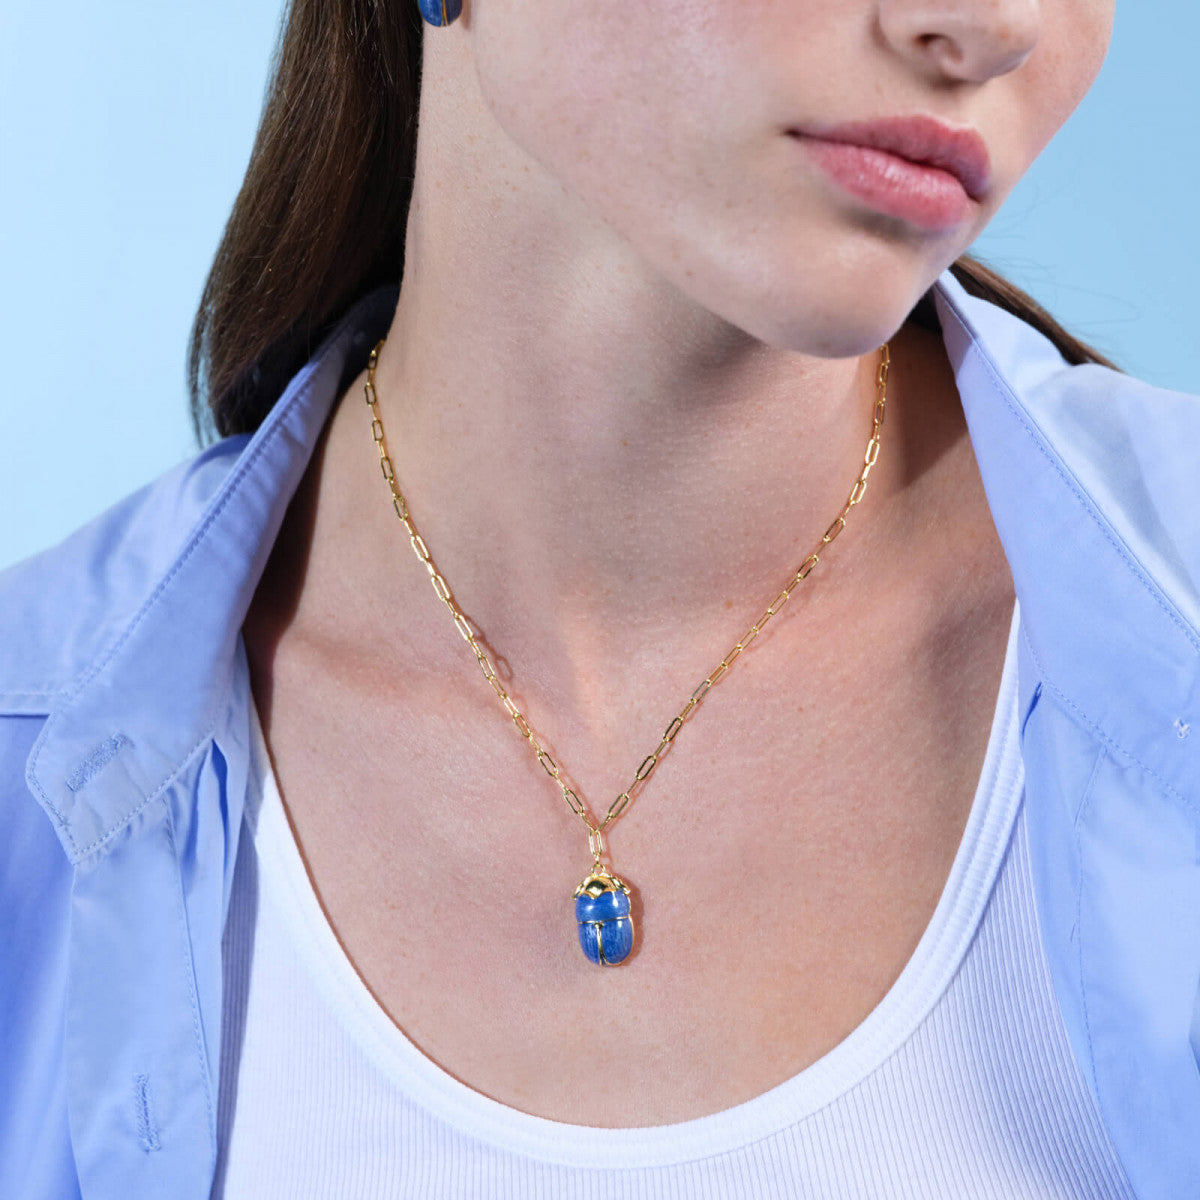 BLUE SCARAB BEETLE AND RECTANGLE LINK CHAIN NECKLACE